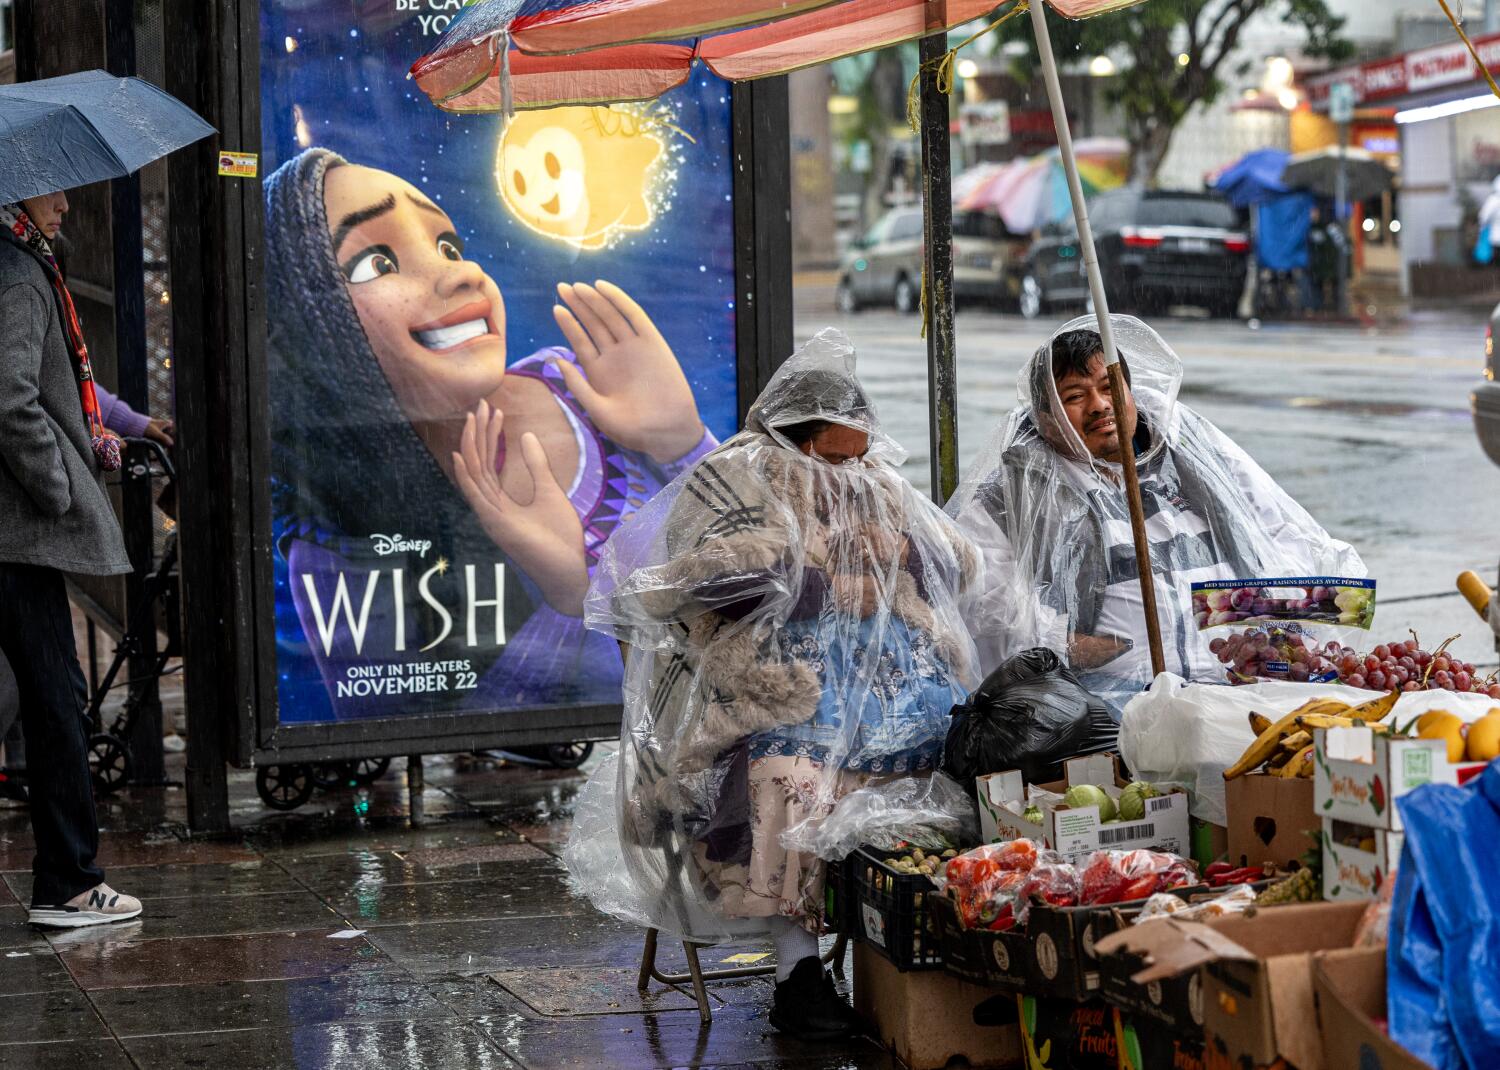 Rains return to Southern California on Friday after brief break